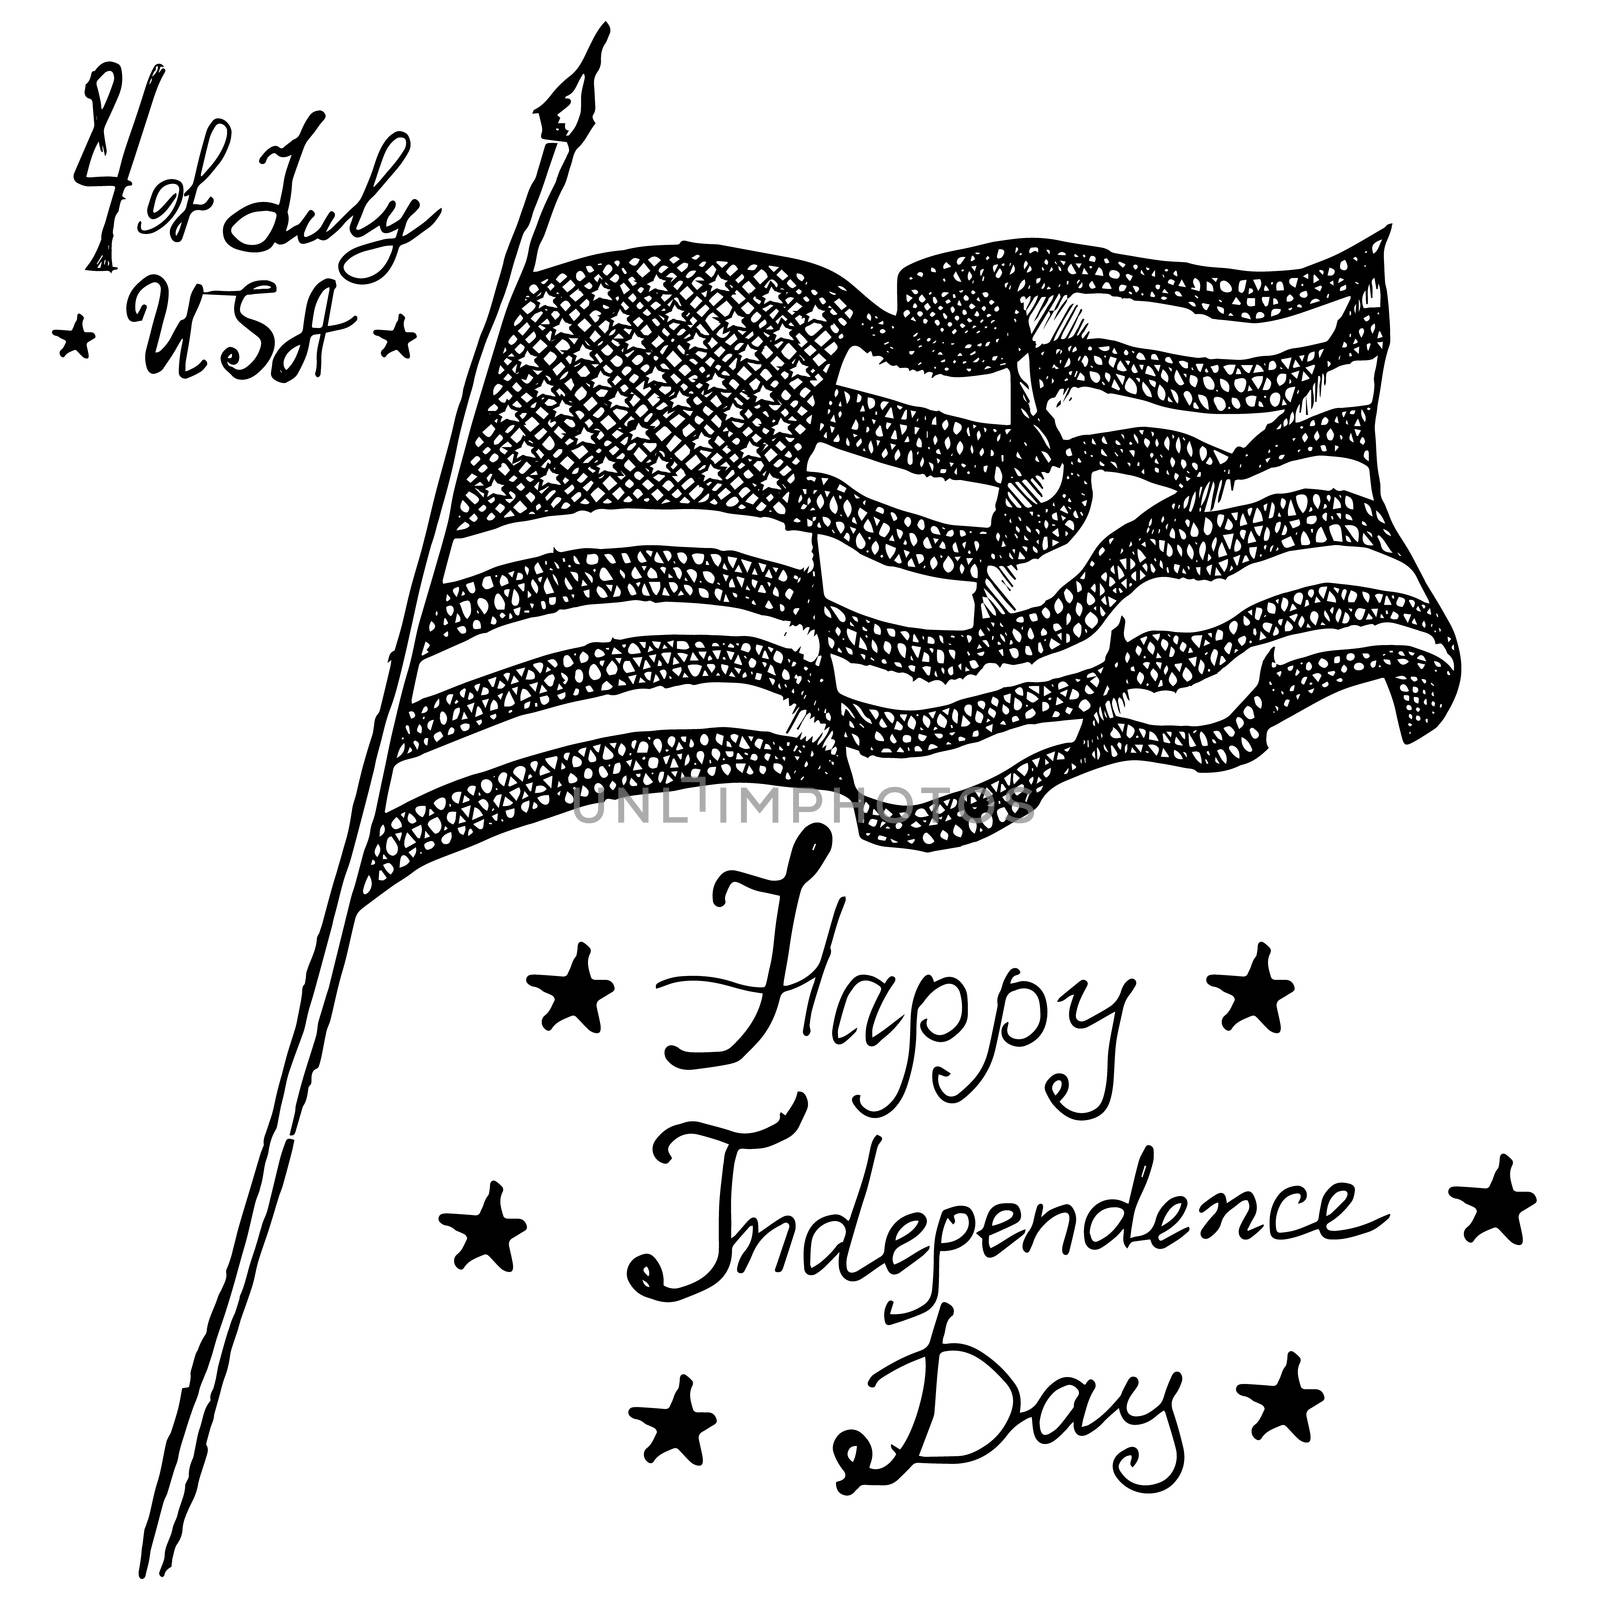 Usa waving flag, American symbol, forth of july, Hand drawn sketch, text happy independence day, vector illustration, isolated on white.